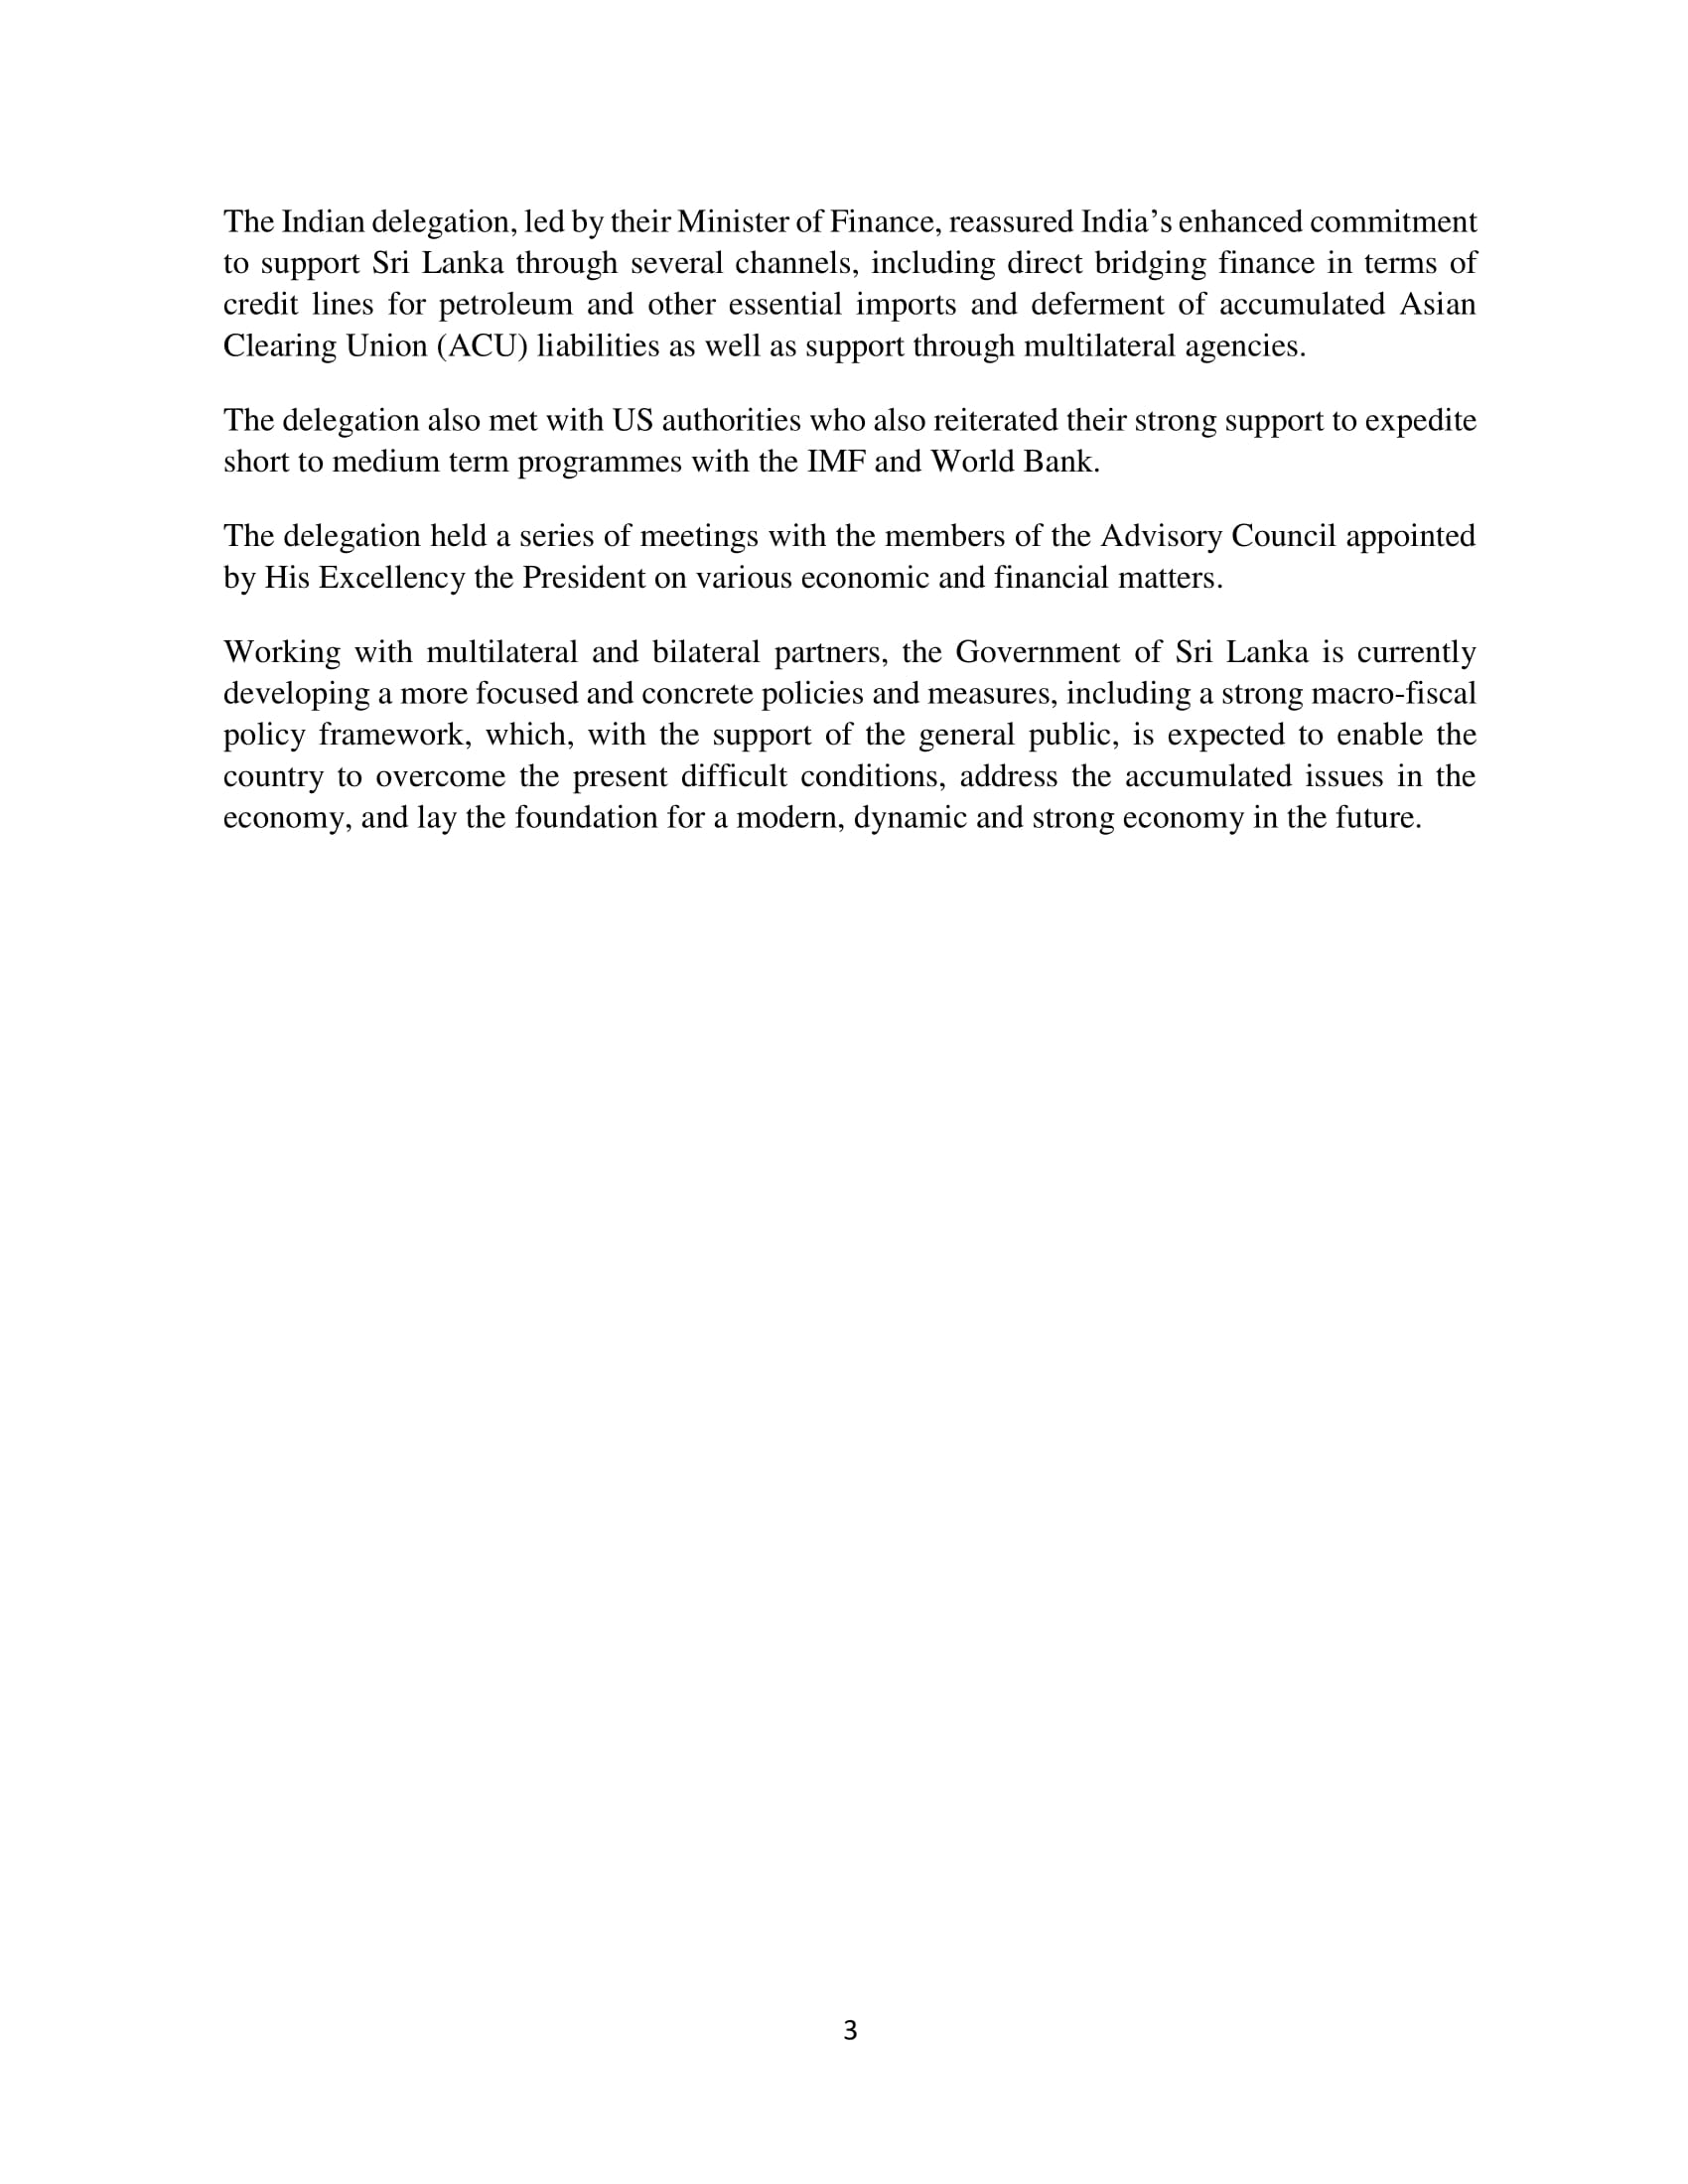 2022 04 30 Press Release on IMF Discussion with Giovernors comments Final 3